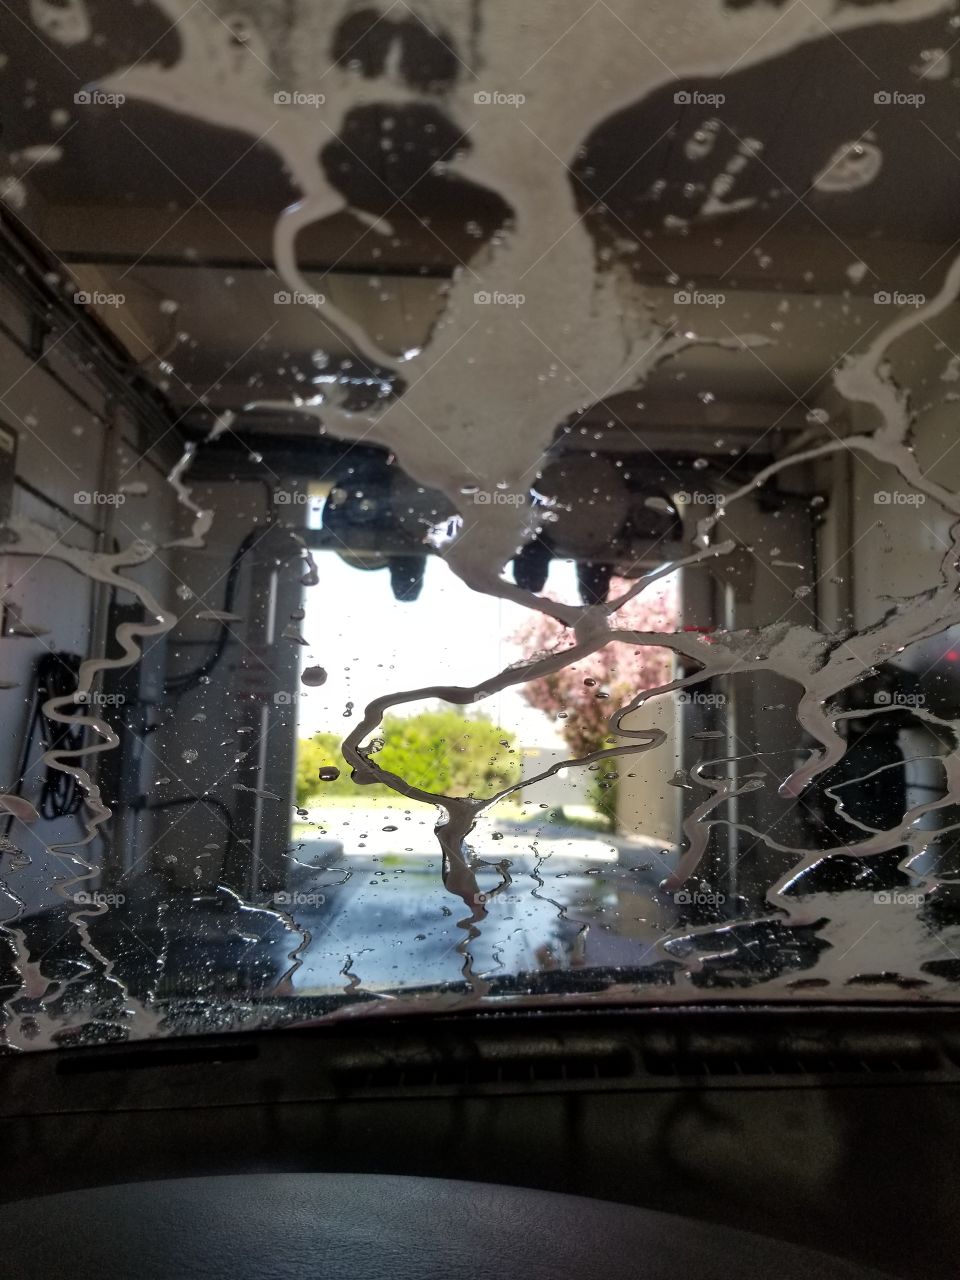 View from the carwash.